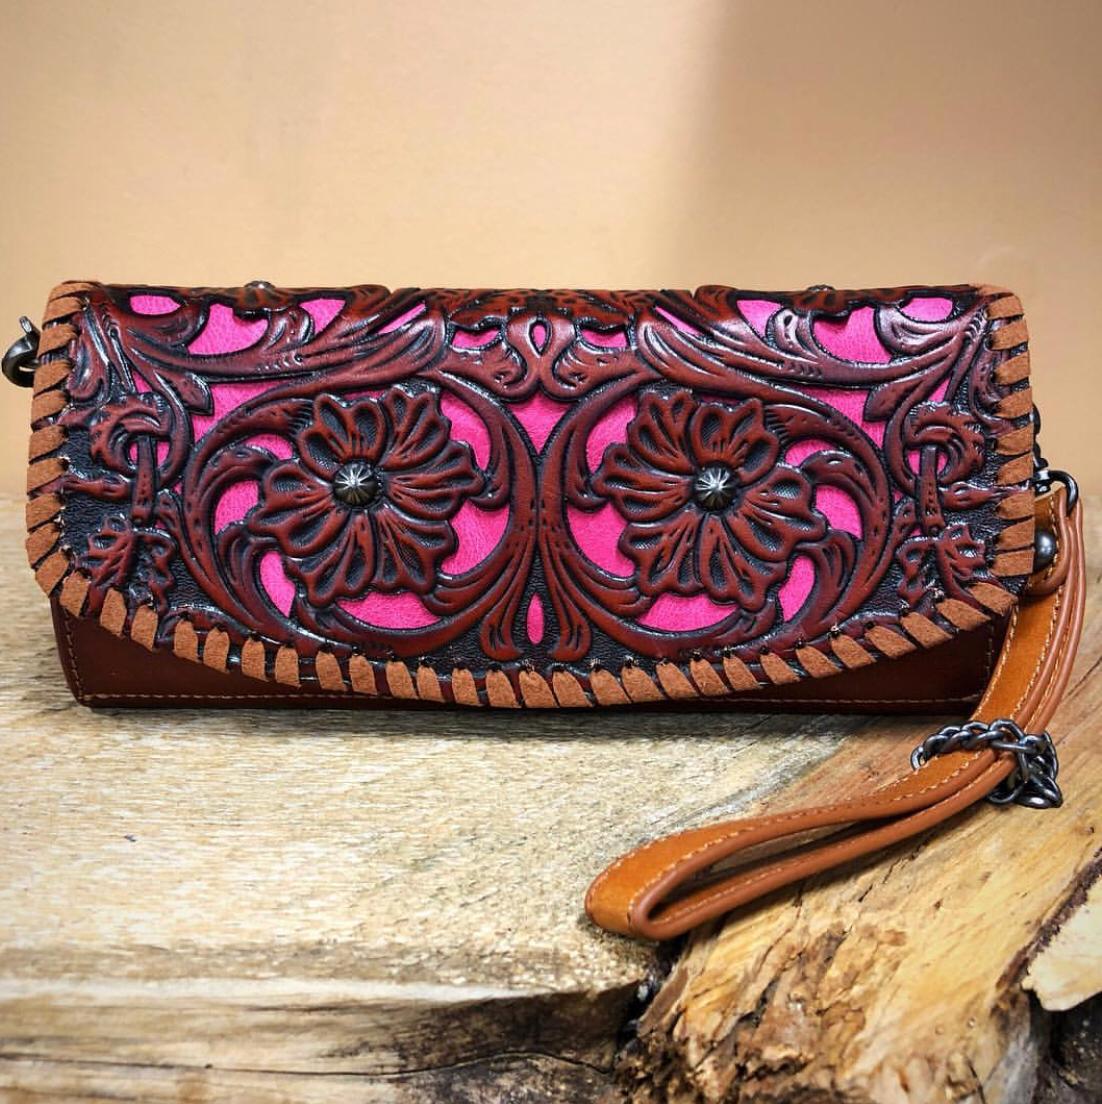 Leather Hand Tooled Leather Wallet Carving Handmade Unique Stylish Clutch  Purse | eBay